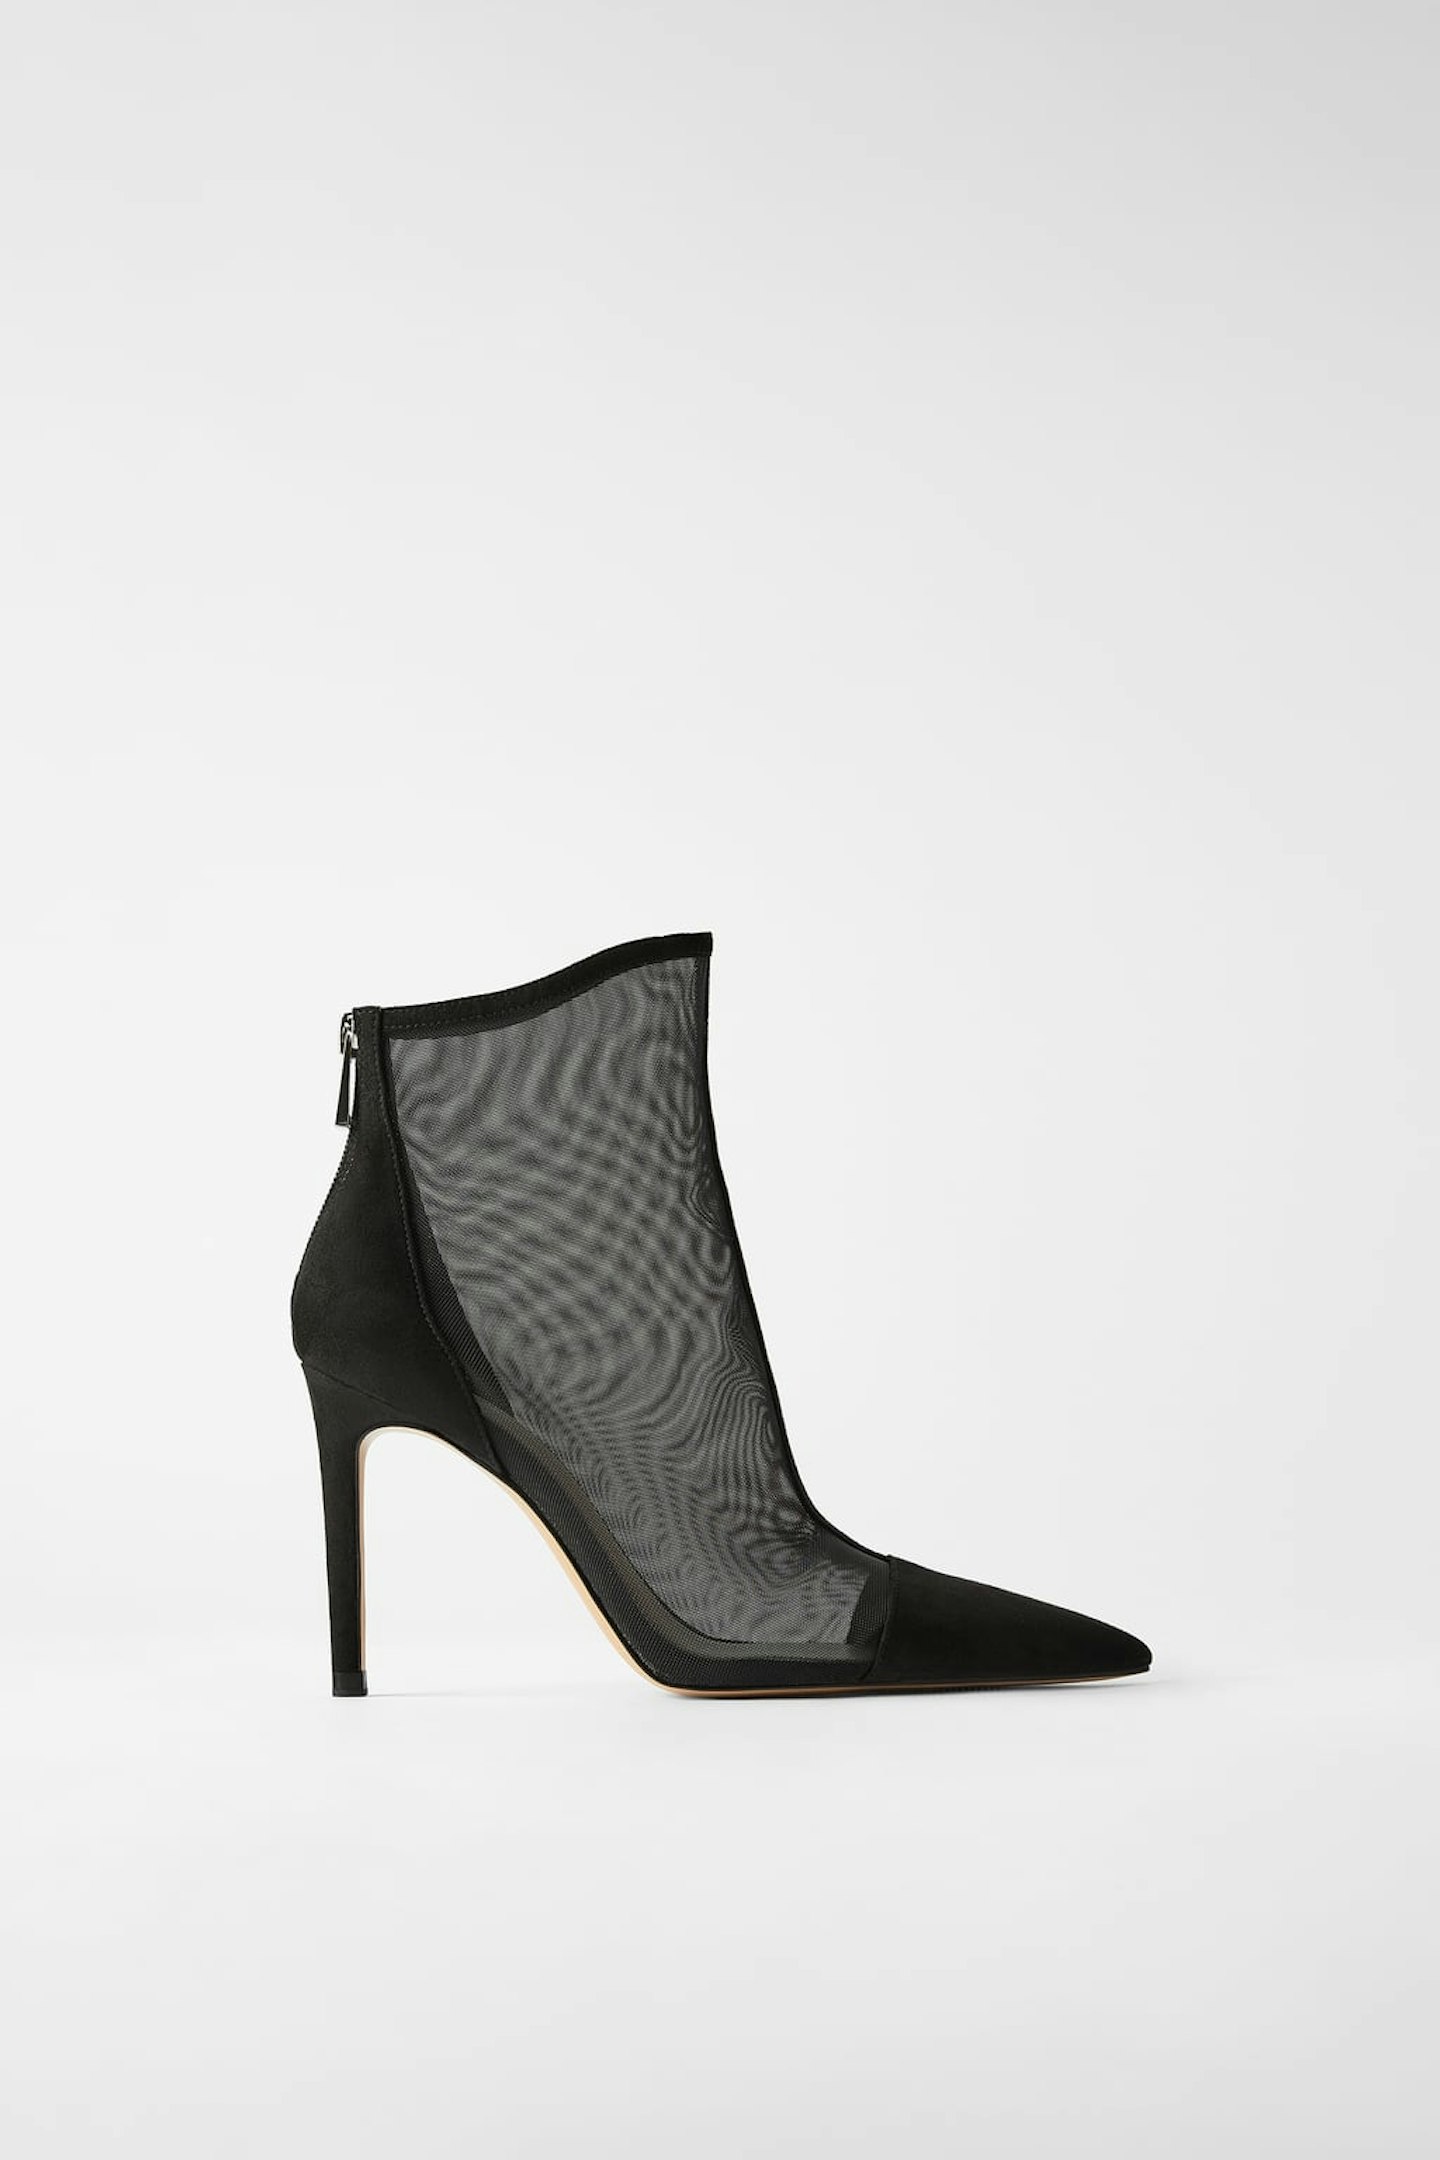 High Heel Mesh Ankle Boots, £59.99